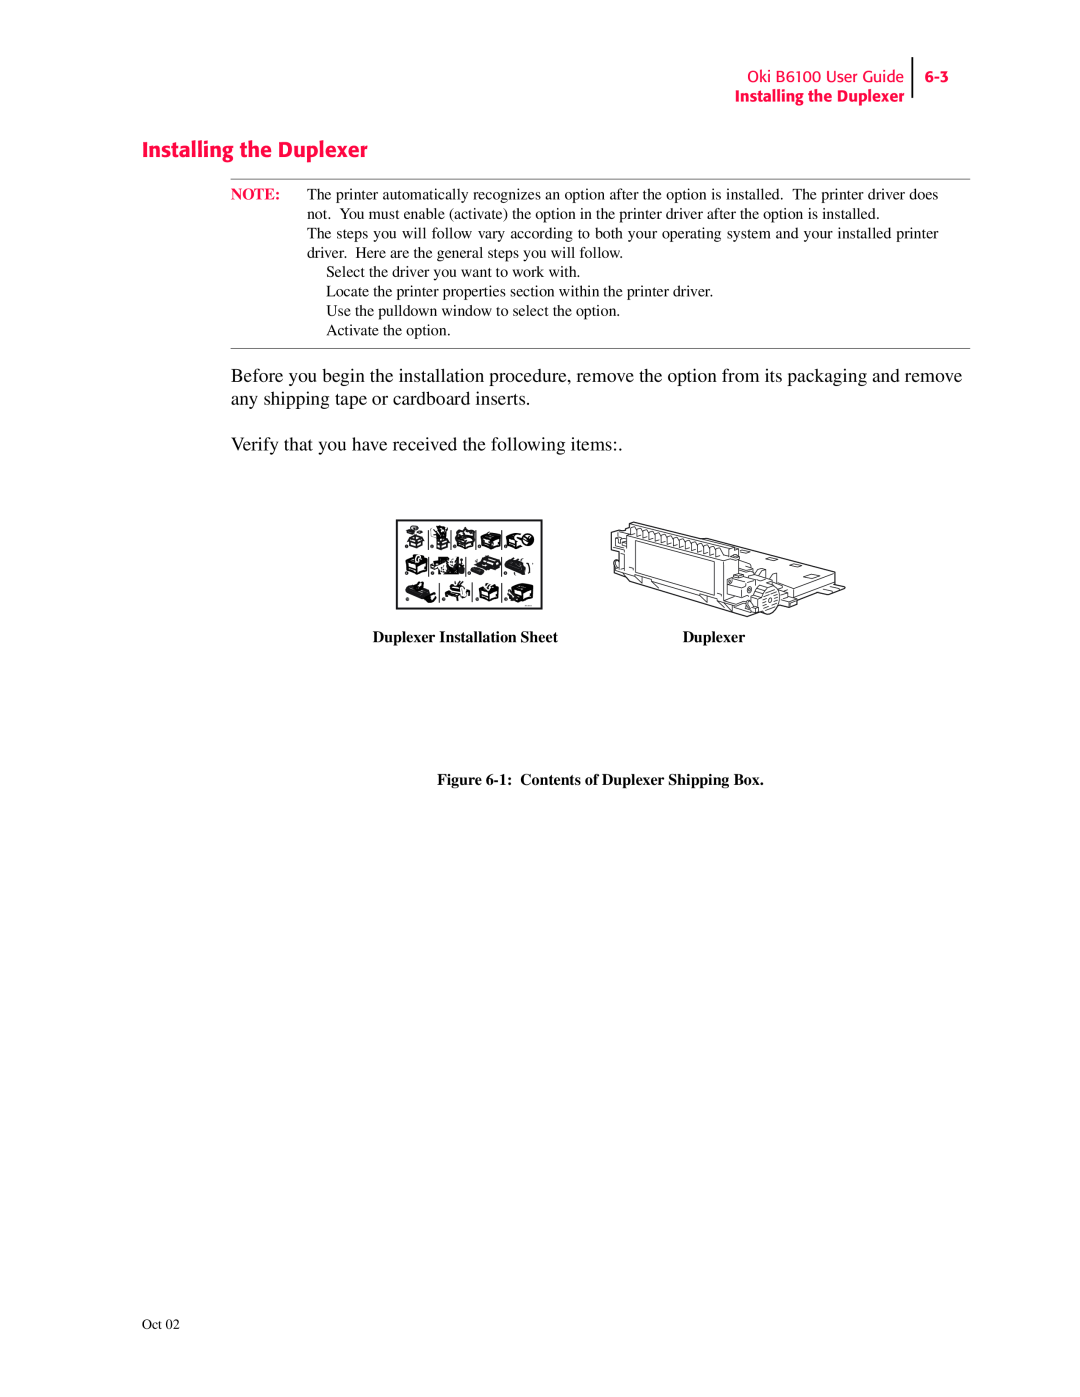 Oki 6100 manual Installing the Duplexer, Verify that you have received the following items, Duplexer Installation Sheet 